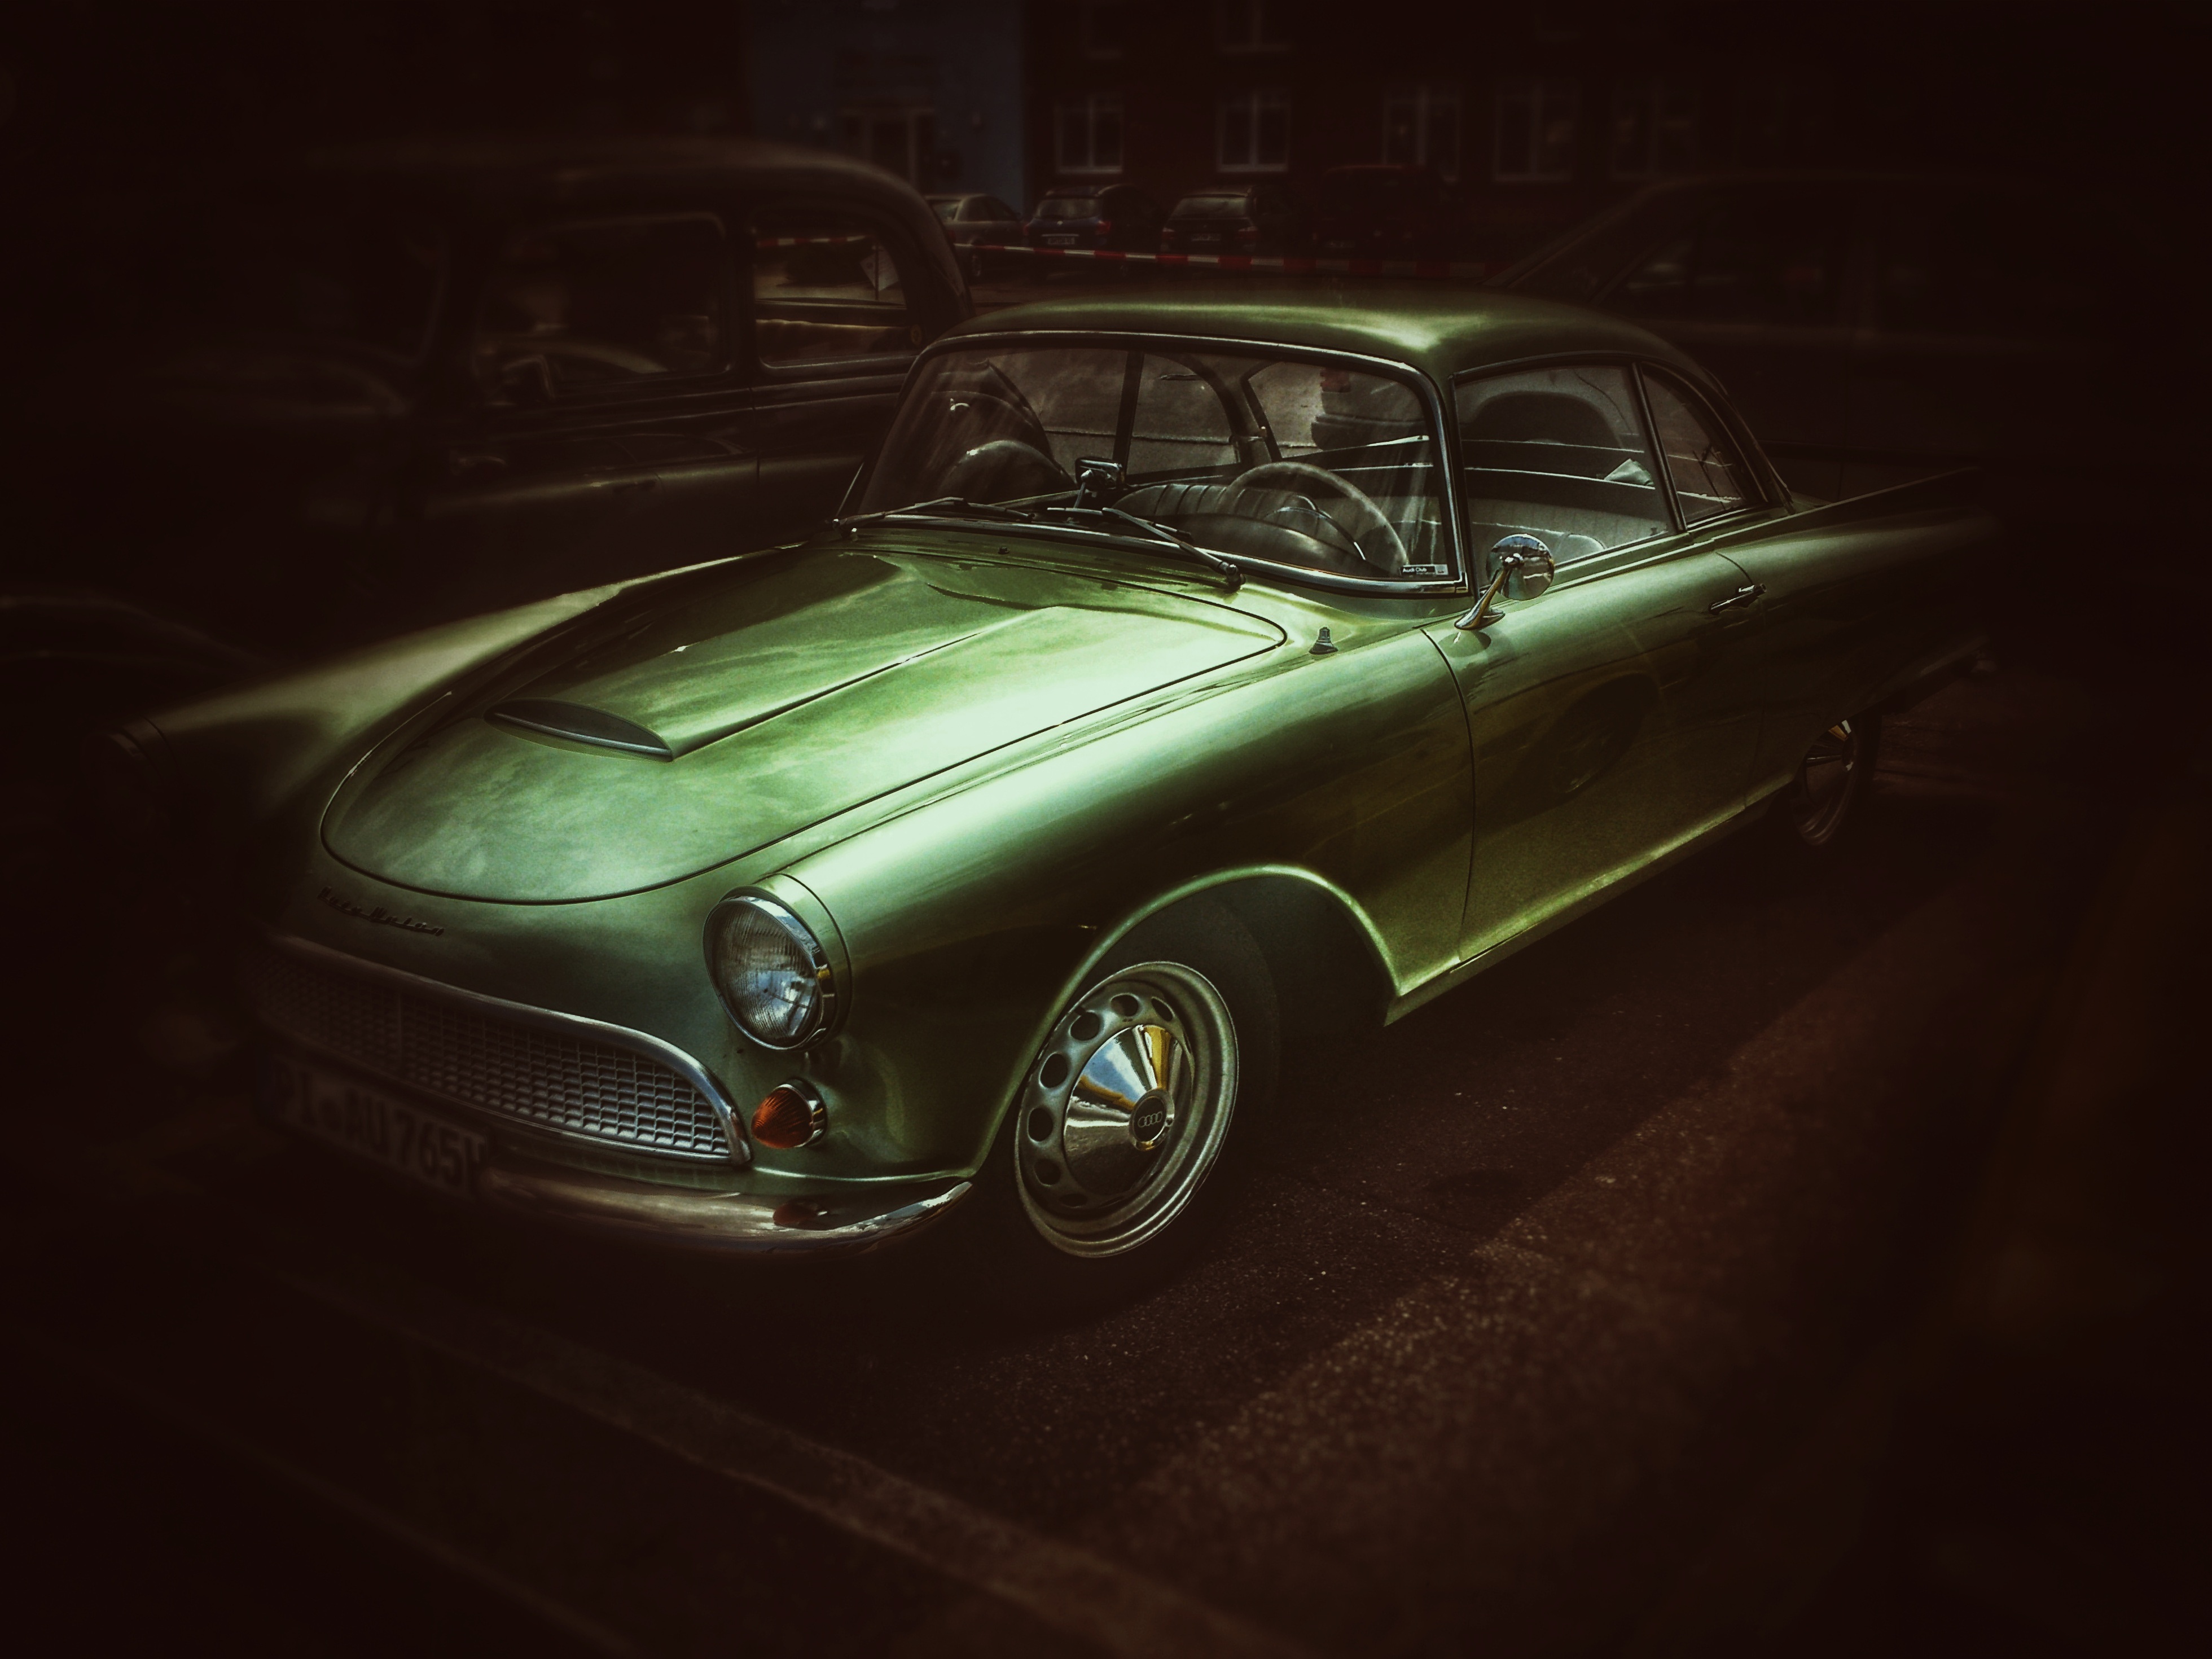 Full HD Wallpaper cars, shine, car, brilliance, old, vintage, style, retro, ancient